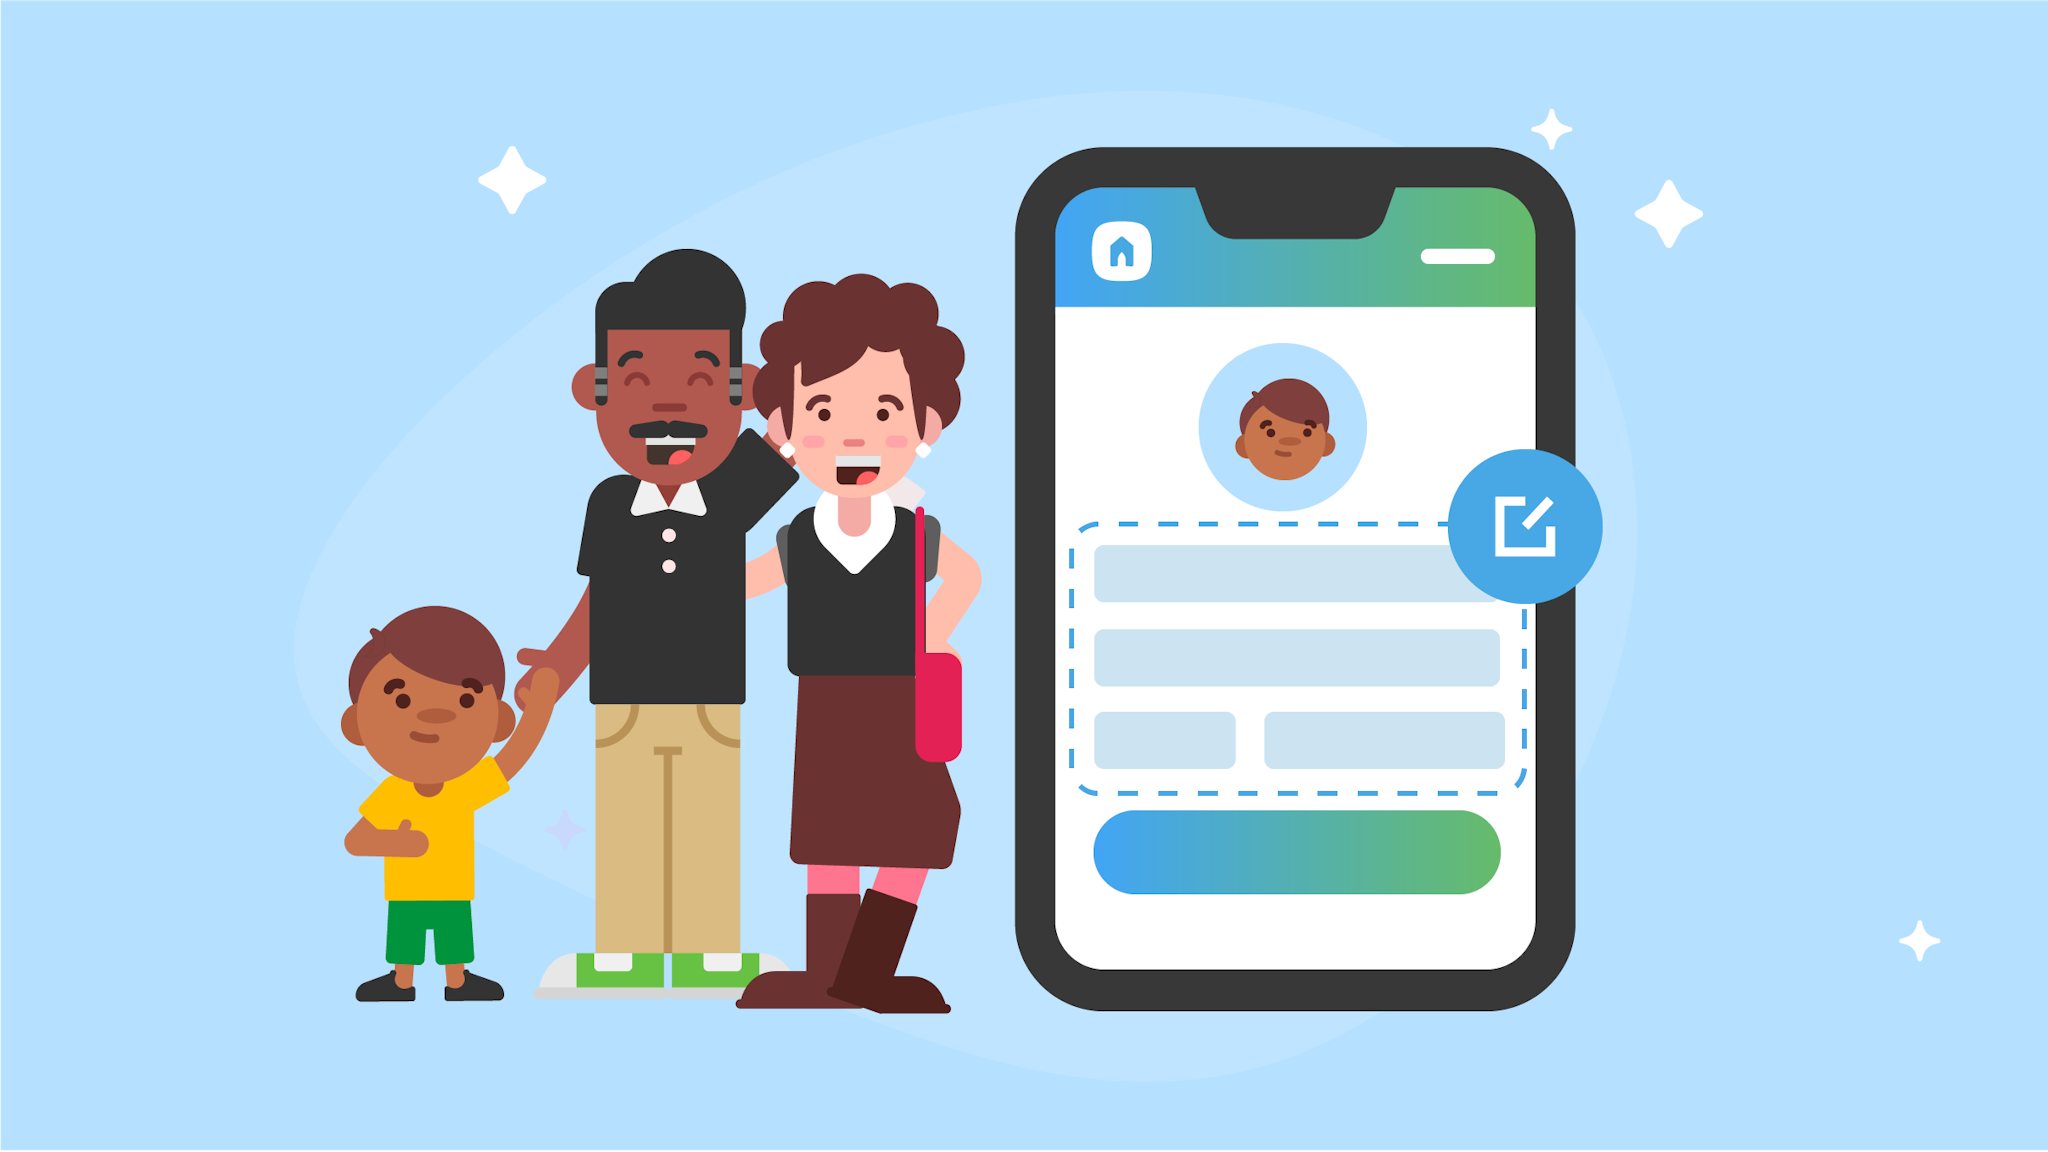 An illustration of a happy family of three, next to a mobile phone illustration showing an editable profile.